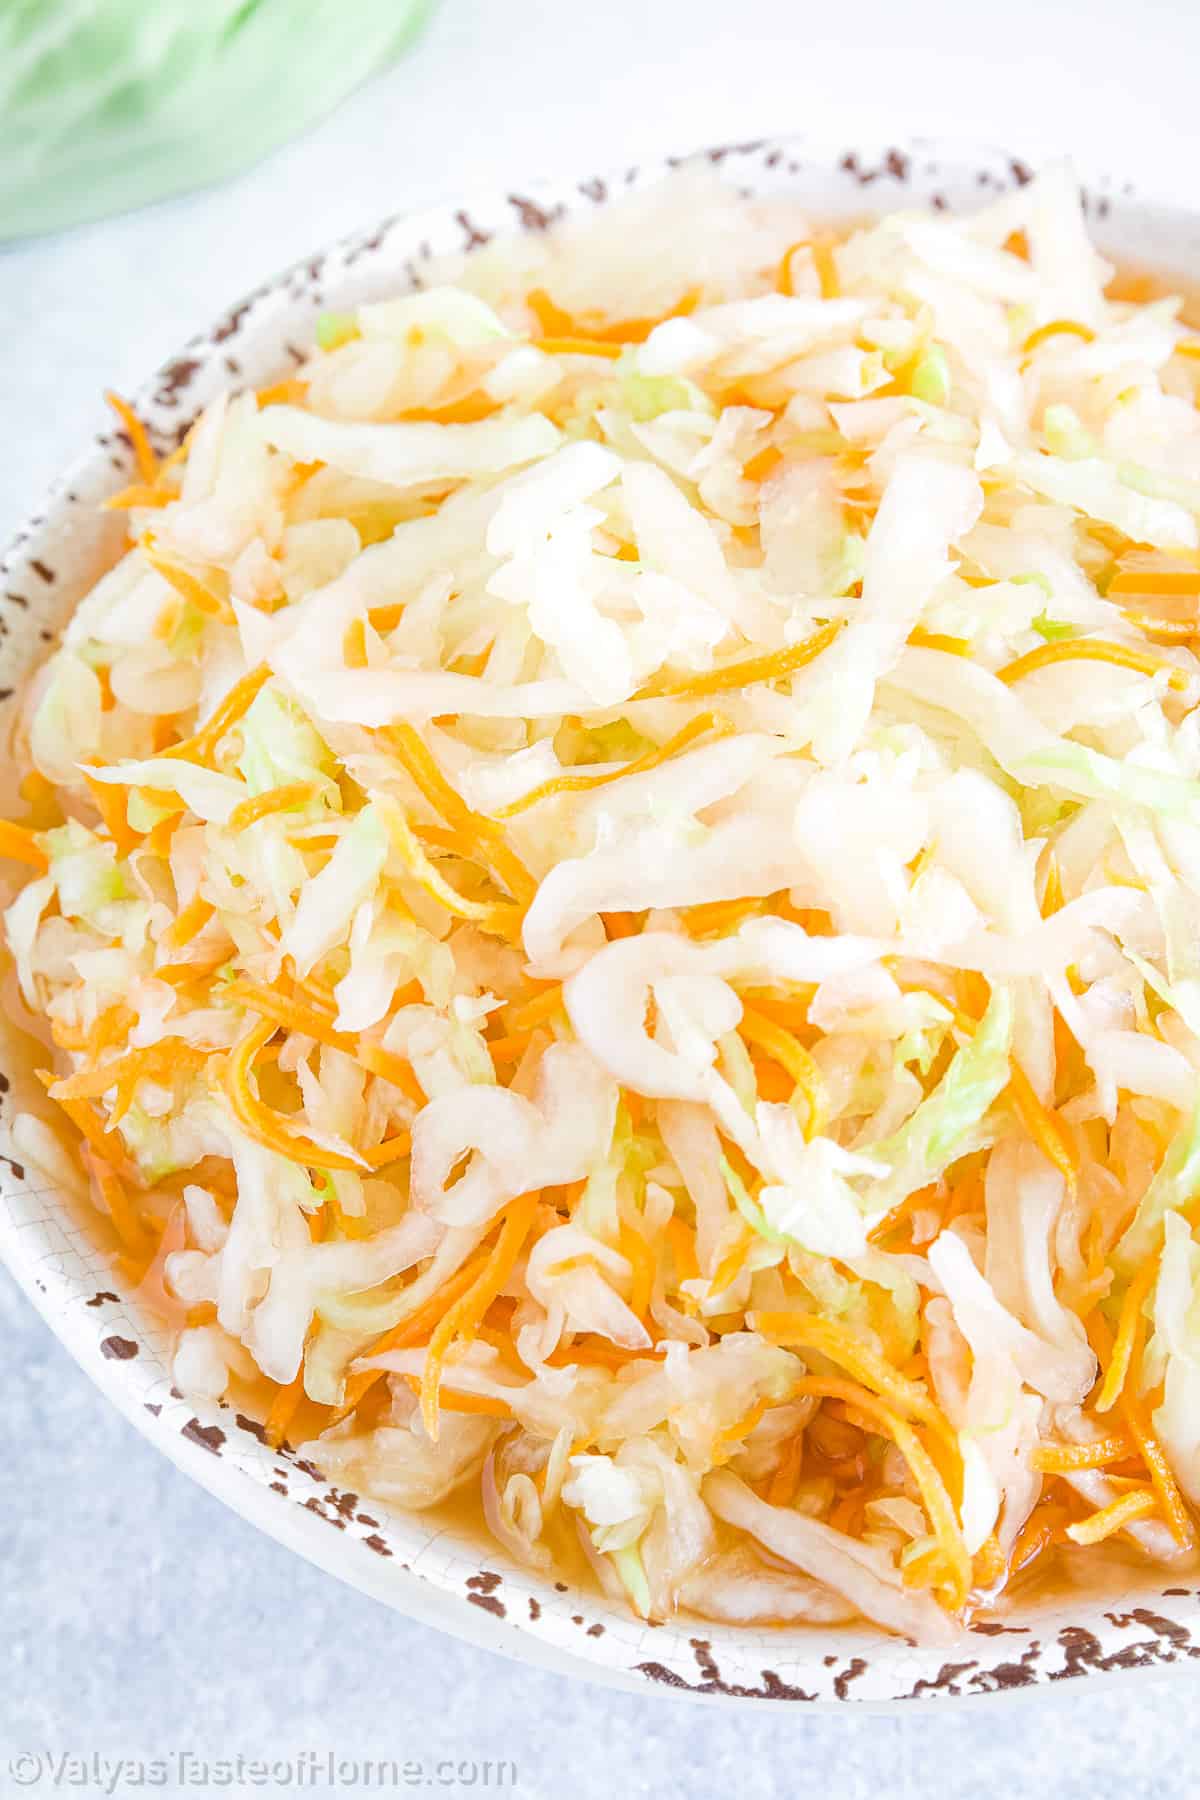 Sauerkraut is a type of fermented food, widely loved for its tangy flavor and various health benefits.